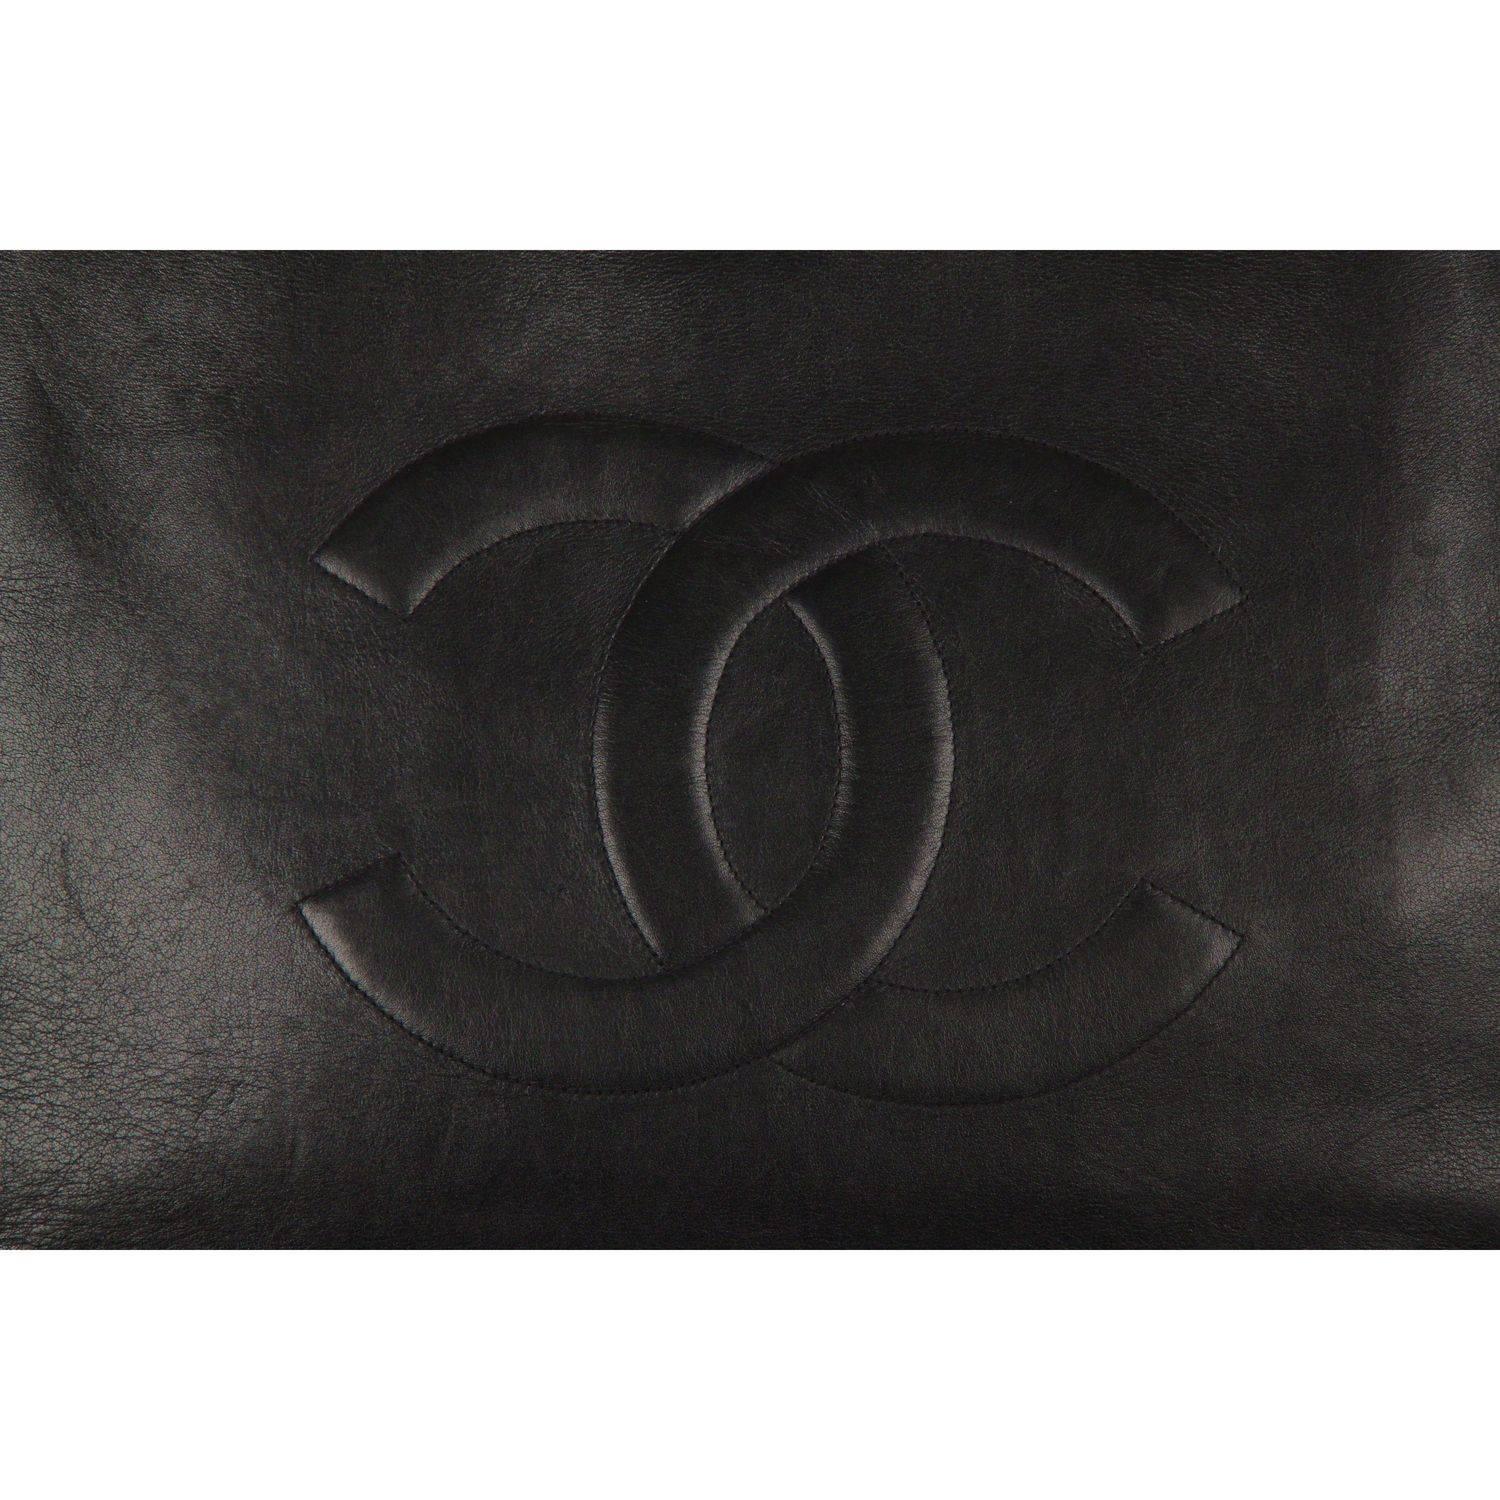 - Chanel Large Tote
- Black lambskin leather
- Big CC logo embroidered on the front
- Open top 
- Chunky gold metal and interwoven  leather shoulder straps
- Leather interior
- 1 side zip pocket inside

Logos & tags: 'CHANEL' & 'Made in France'